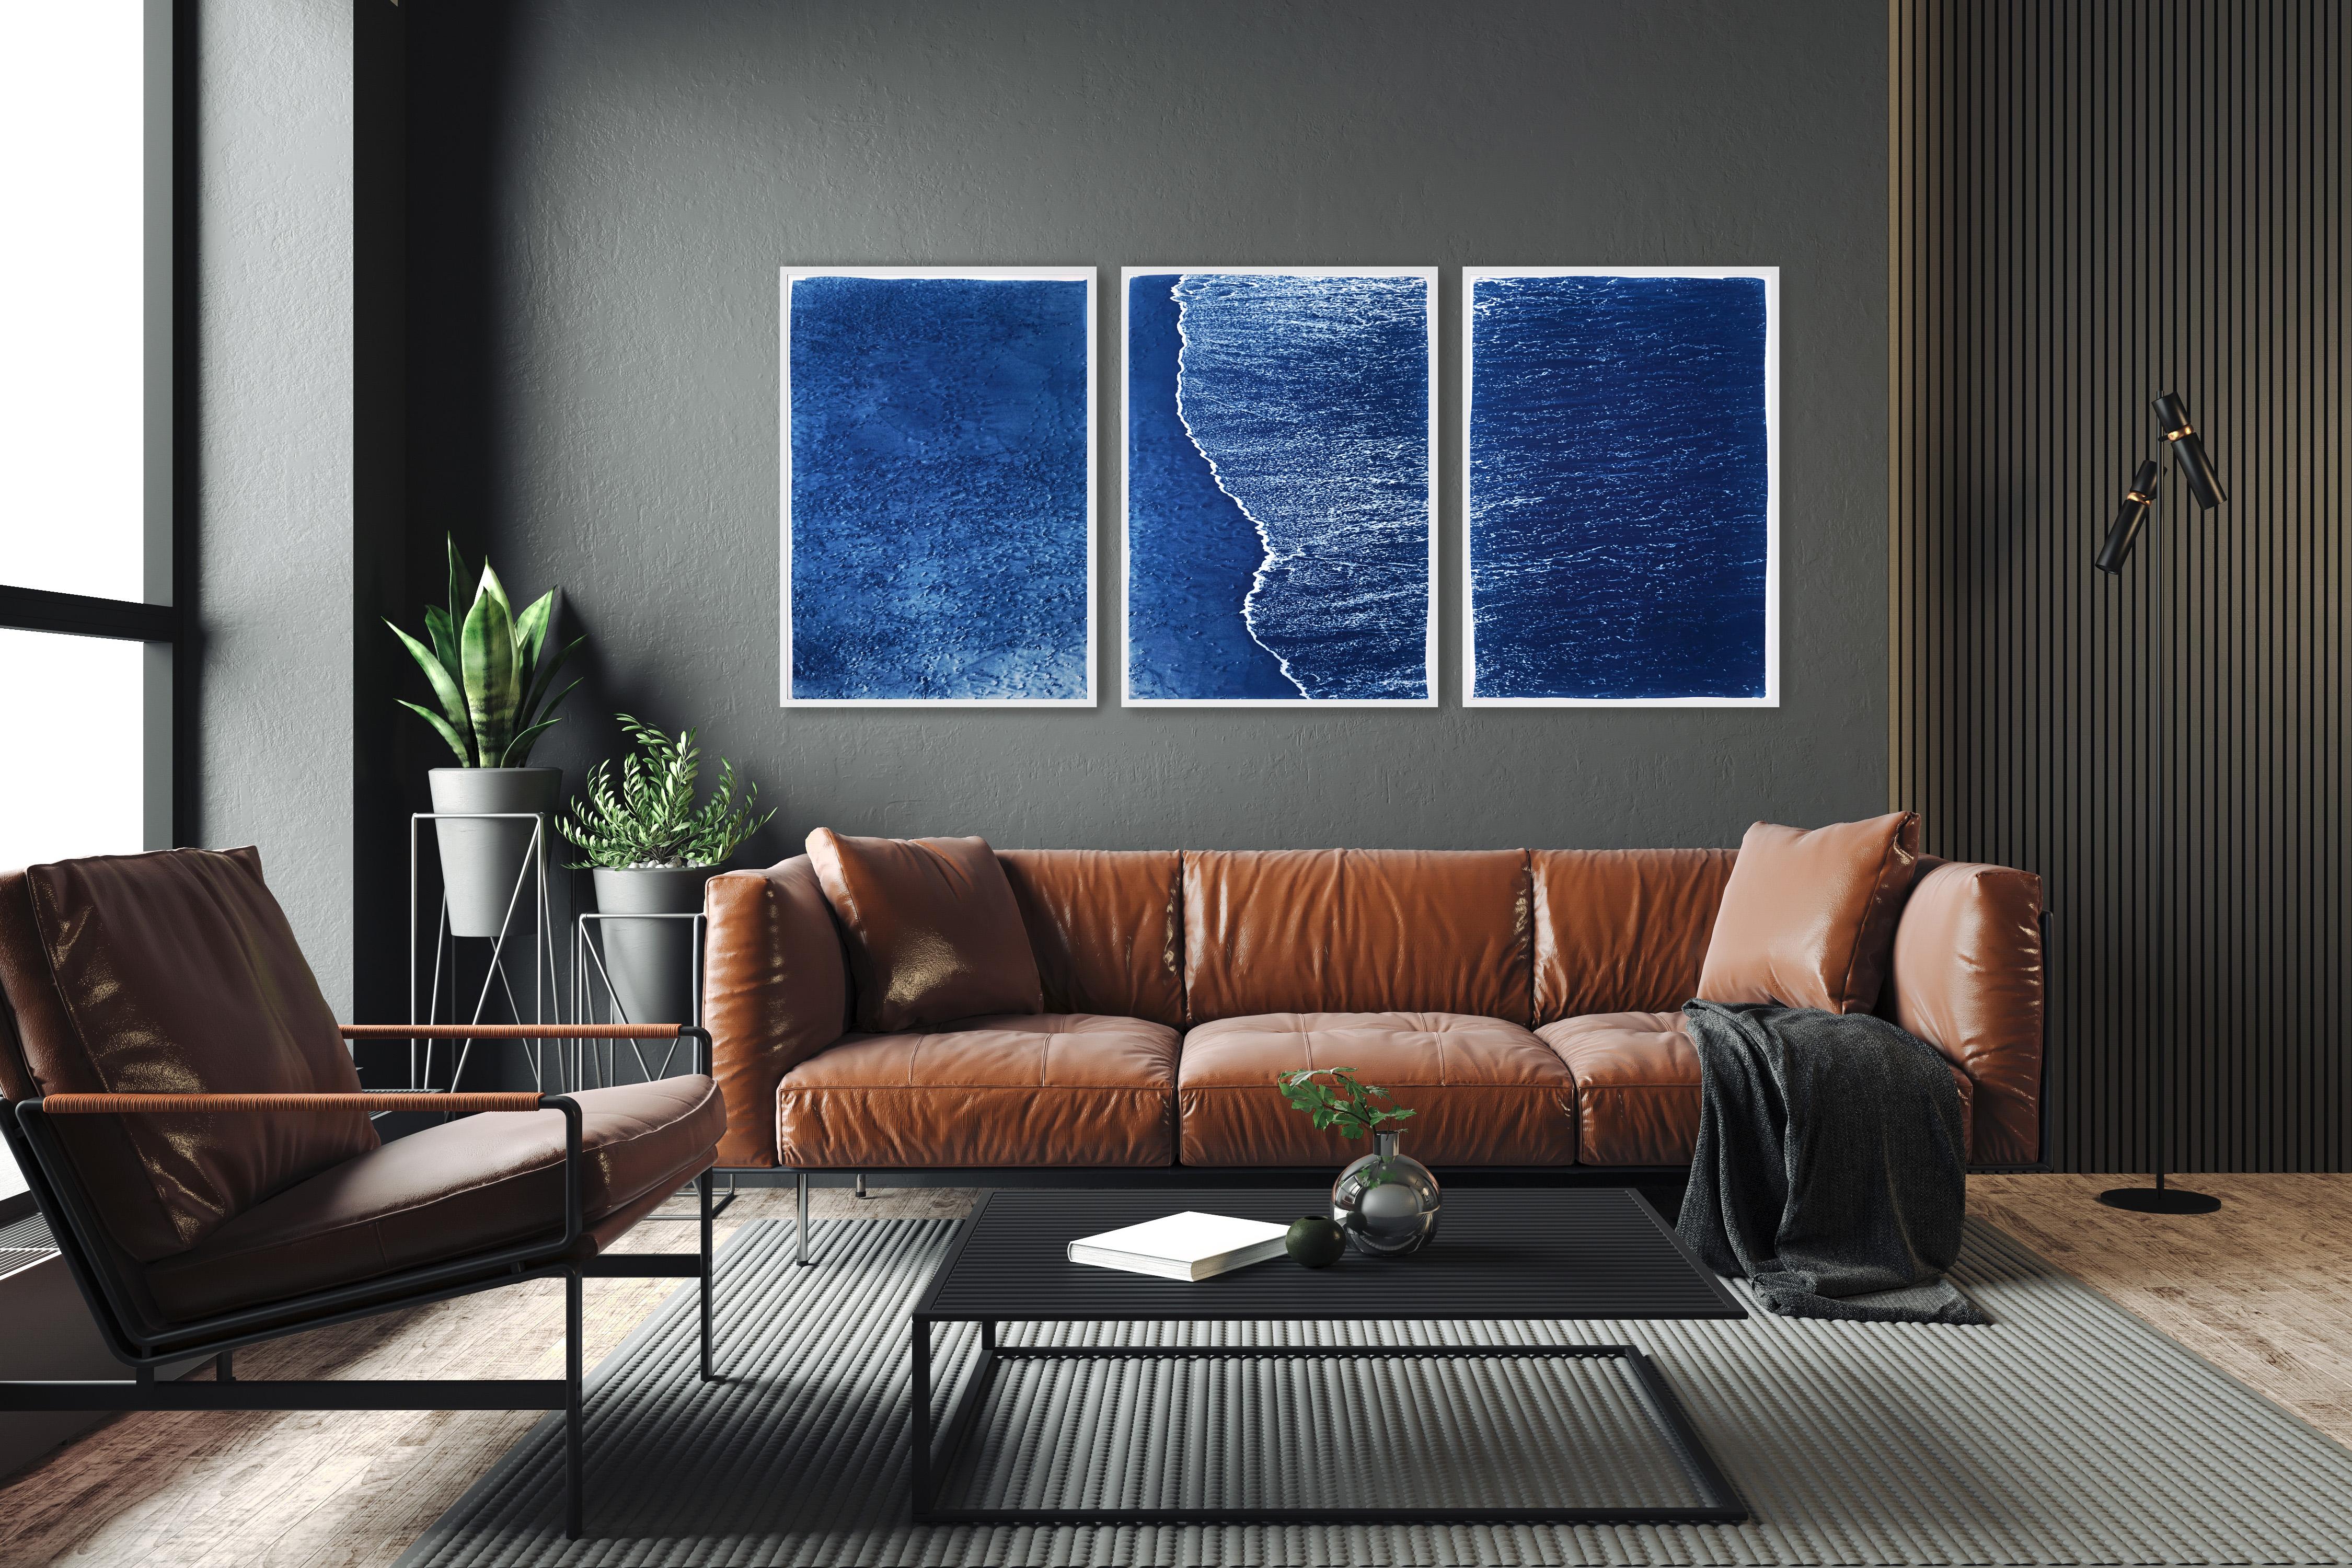 Blue Subtle Seascape of Calm Costa Rica Shore, Minimal Triptych Cyanotype  - Print by Kind of Cyan